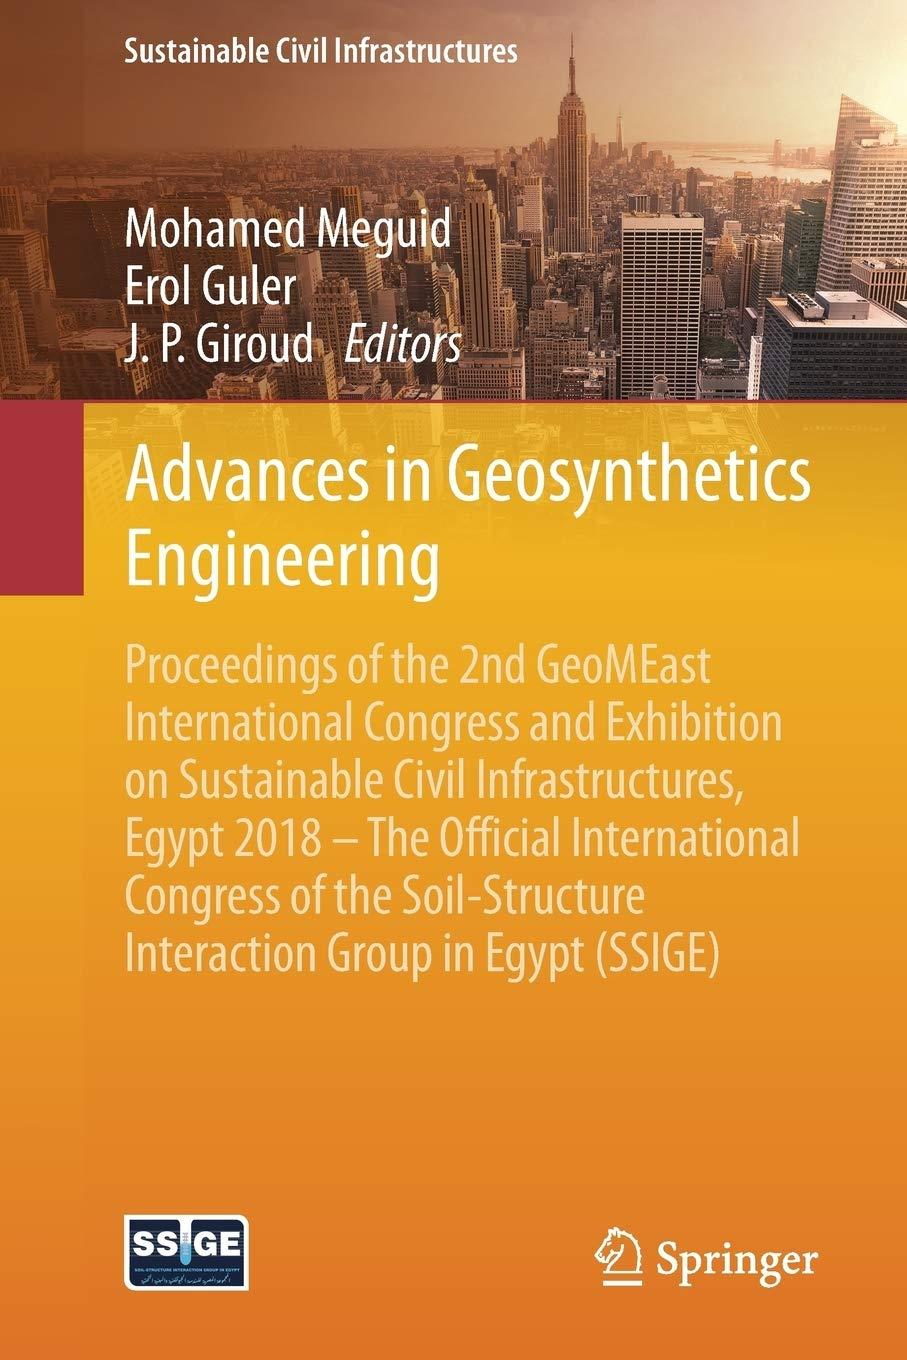 Advances In Geosynthetics Engineering Proceedings Of The 2nd GeoMEast International Congress And Exhibition On Sustainable Civil Infrastructures ... Interaction Group In Egypt SSIGE